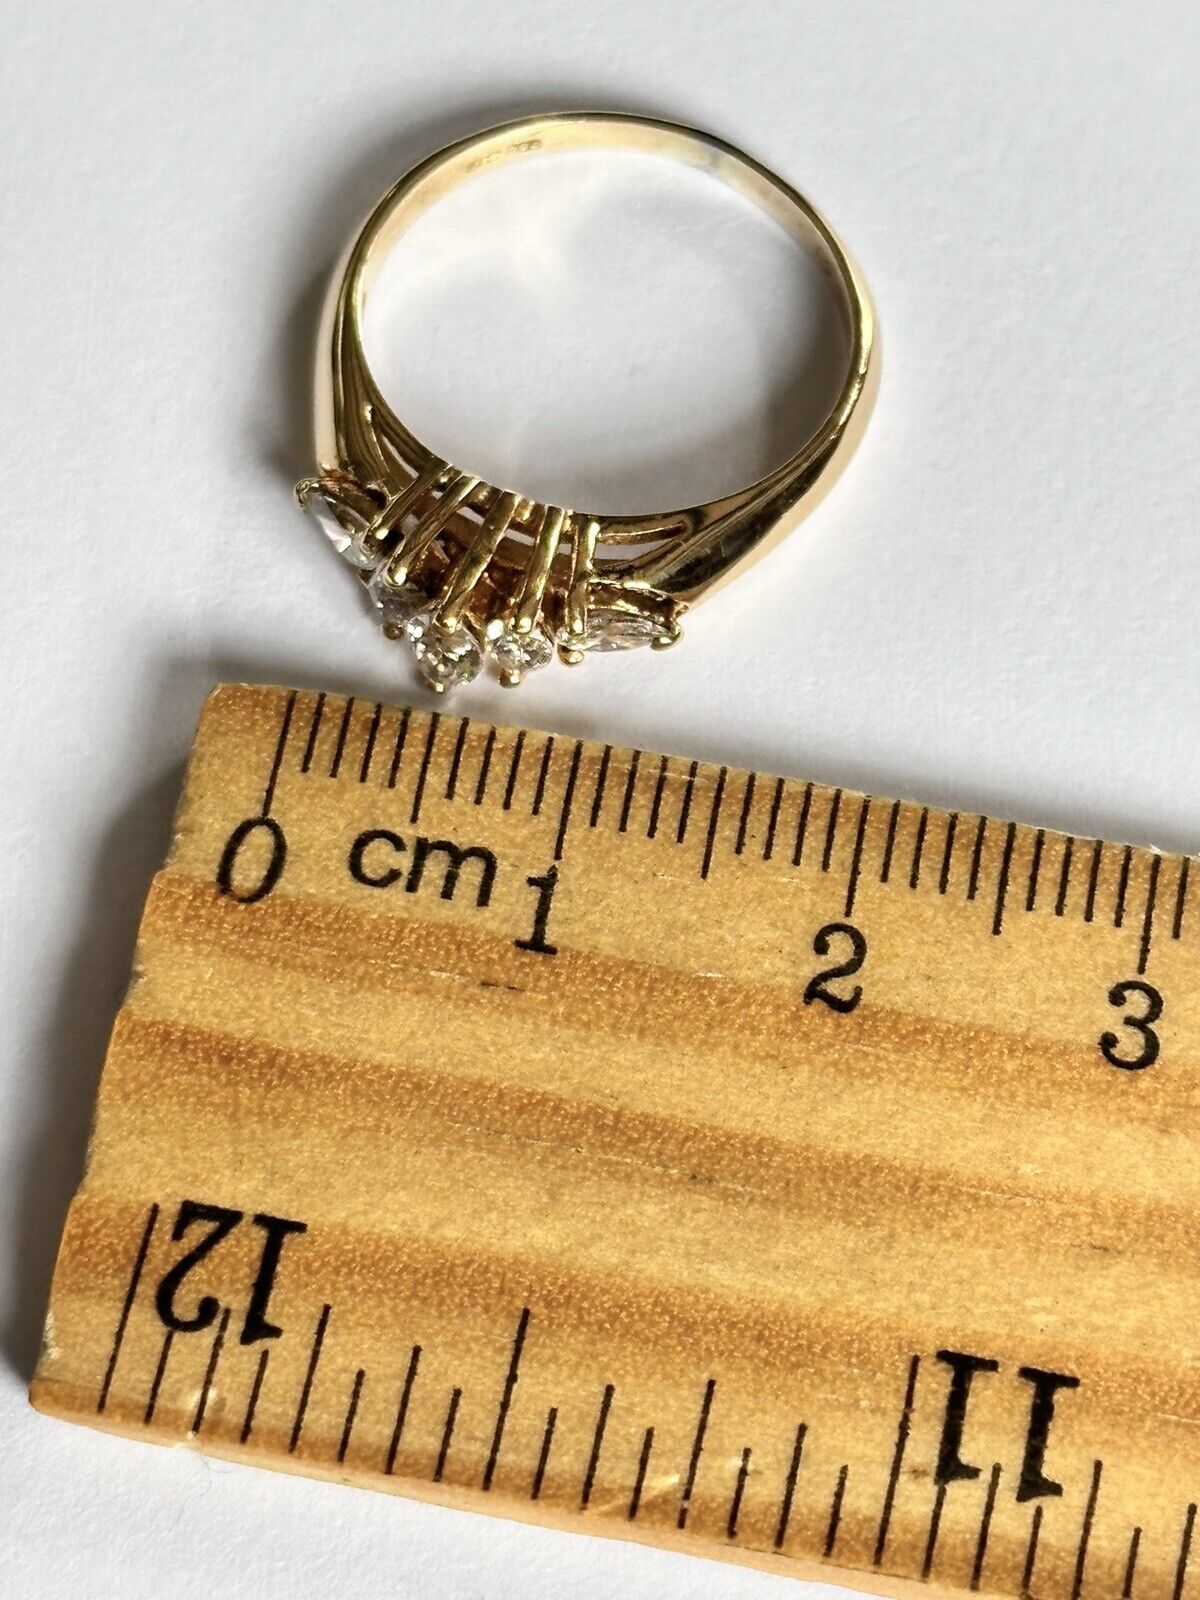 Vintage 18ct Gold Marquise Pear 0.50ct Diamond Ring Size N1/2